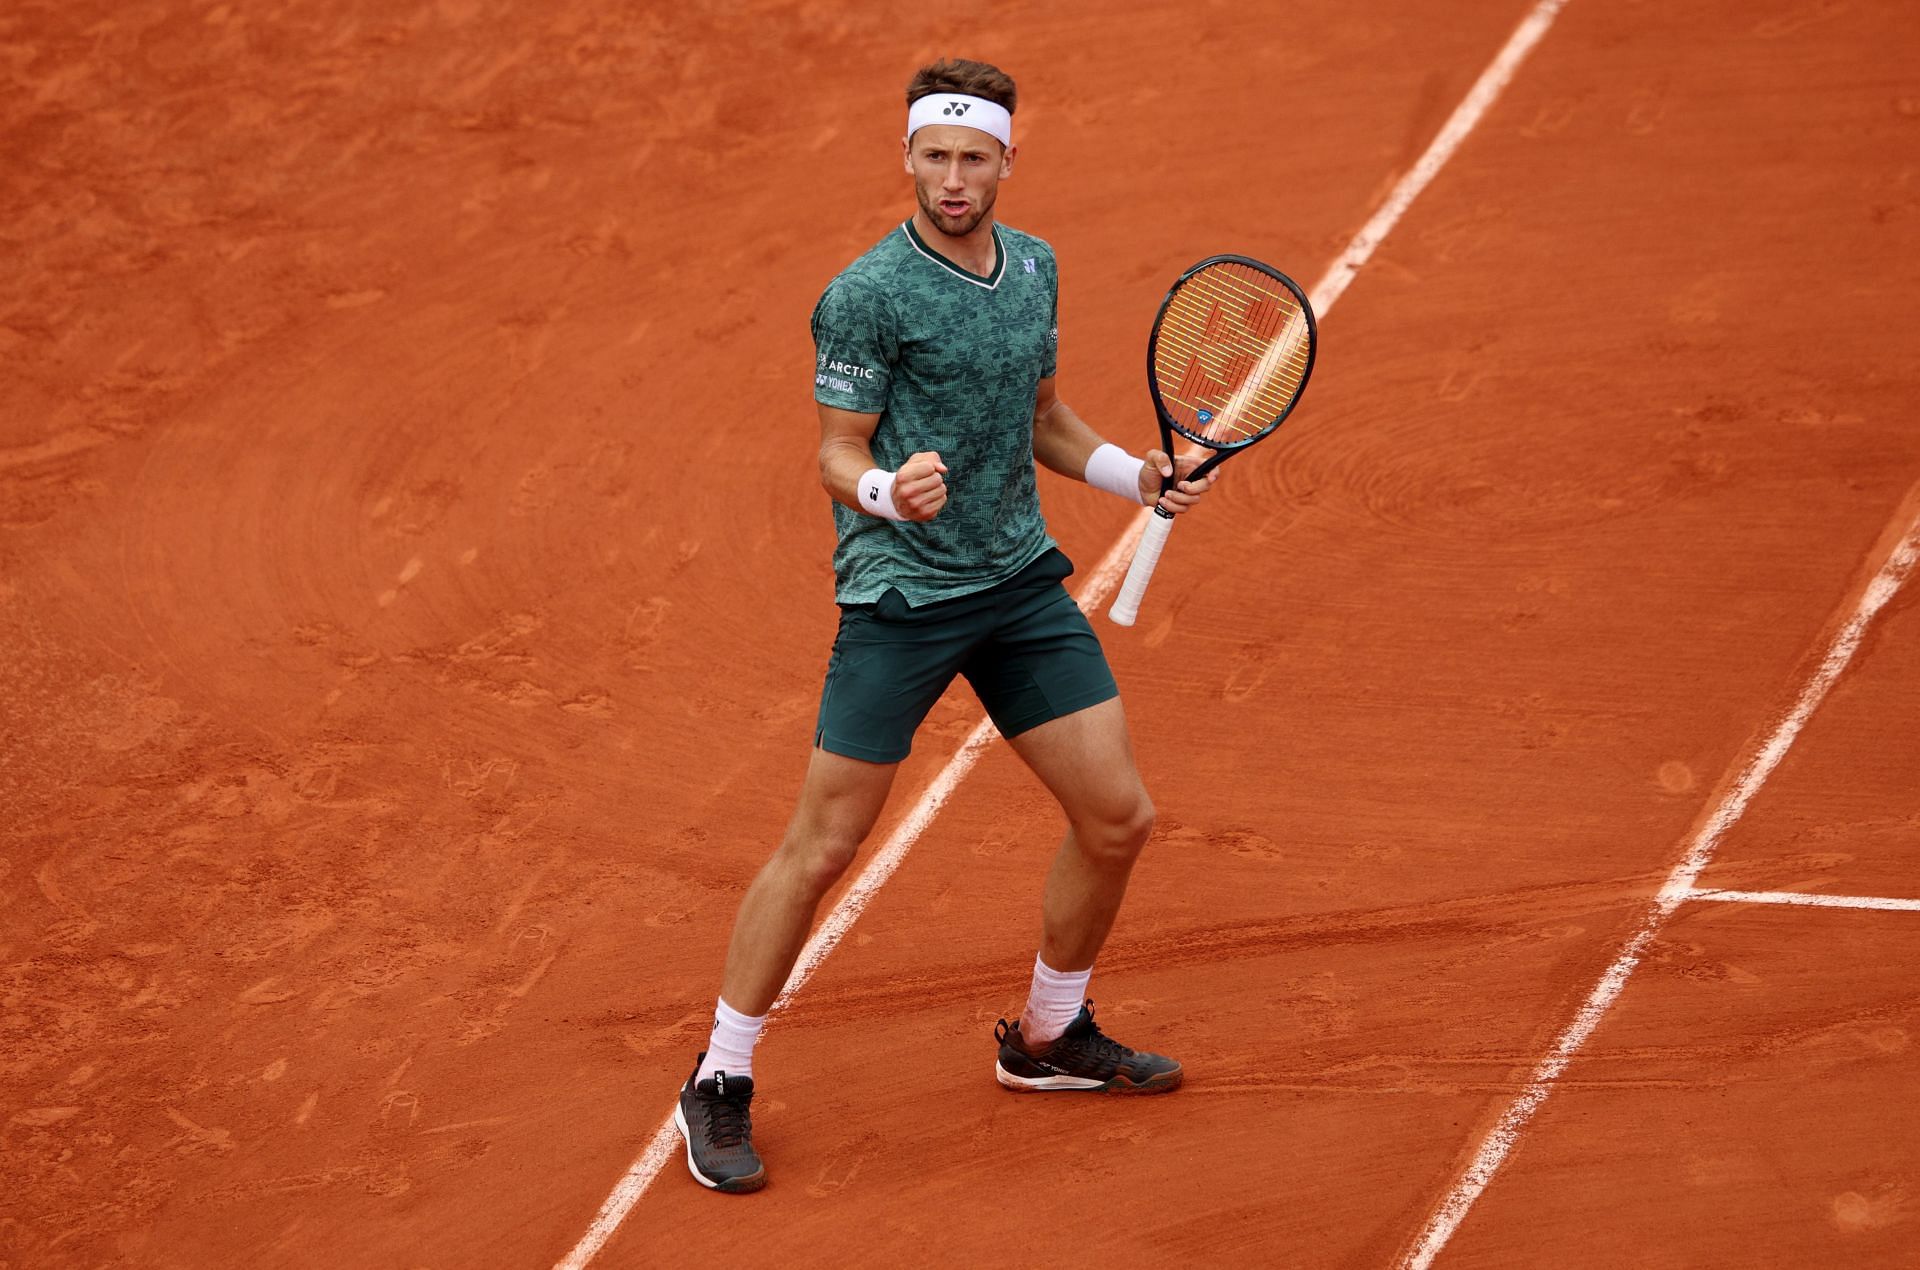 Casper Ruud at the 2022 French Open